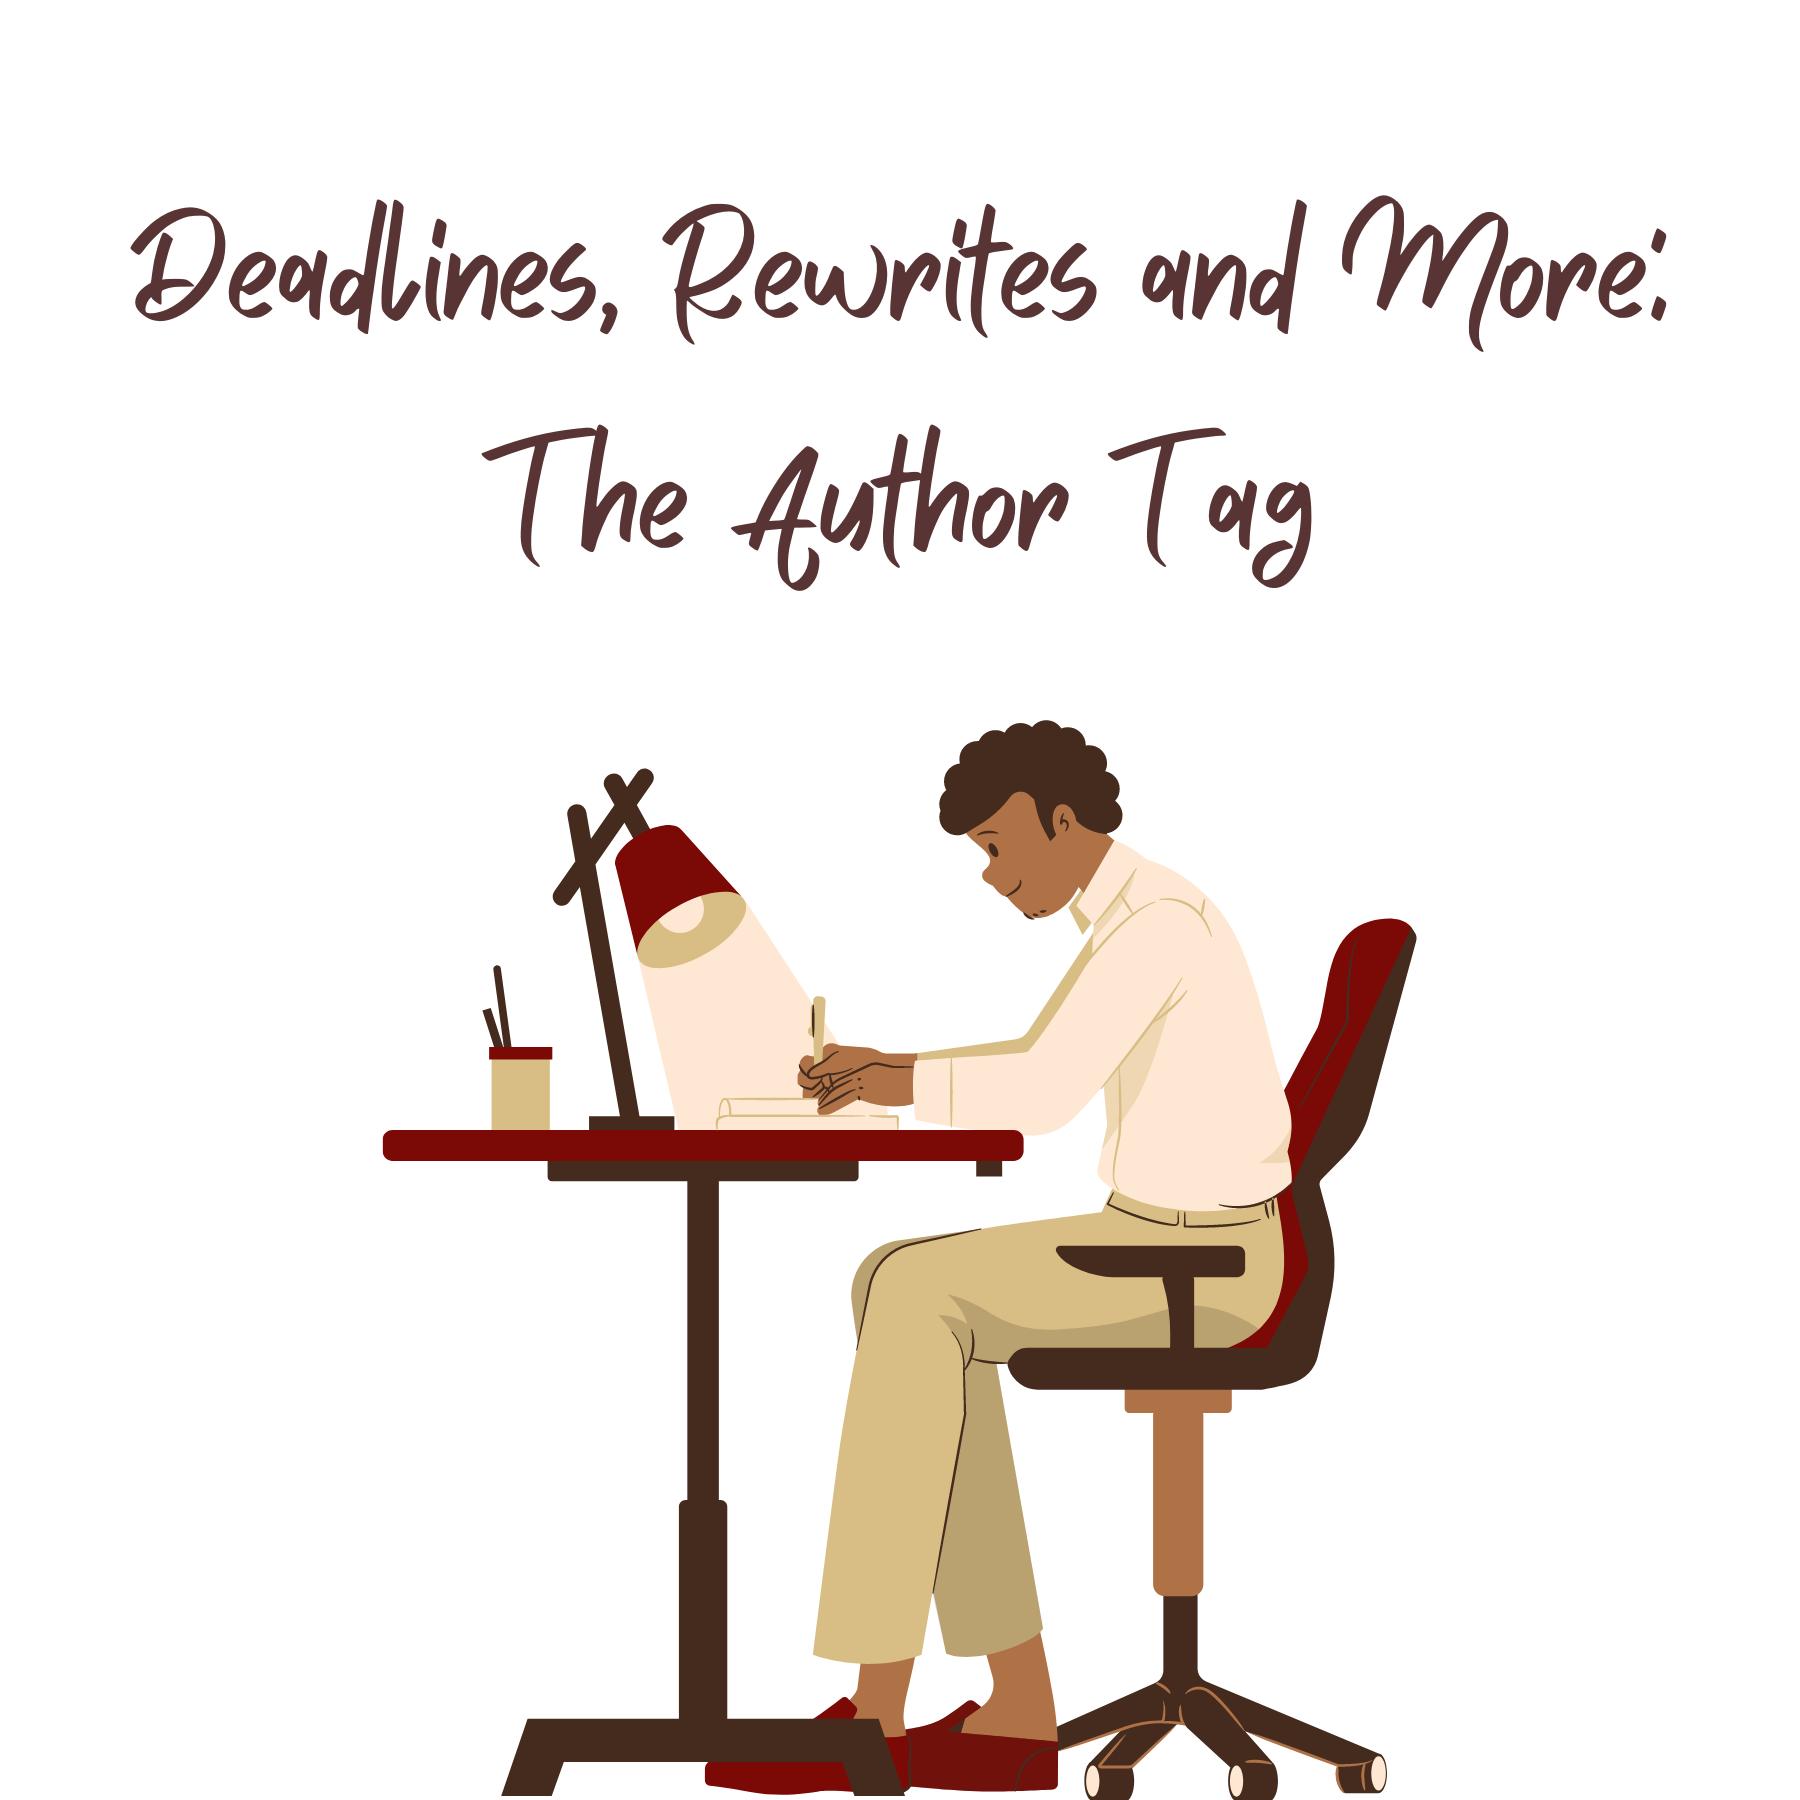 Deadlines, Rewrites and More: The Author Tag